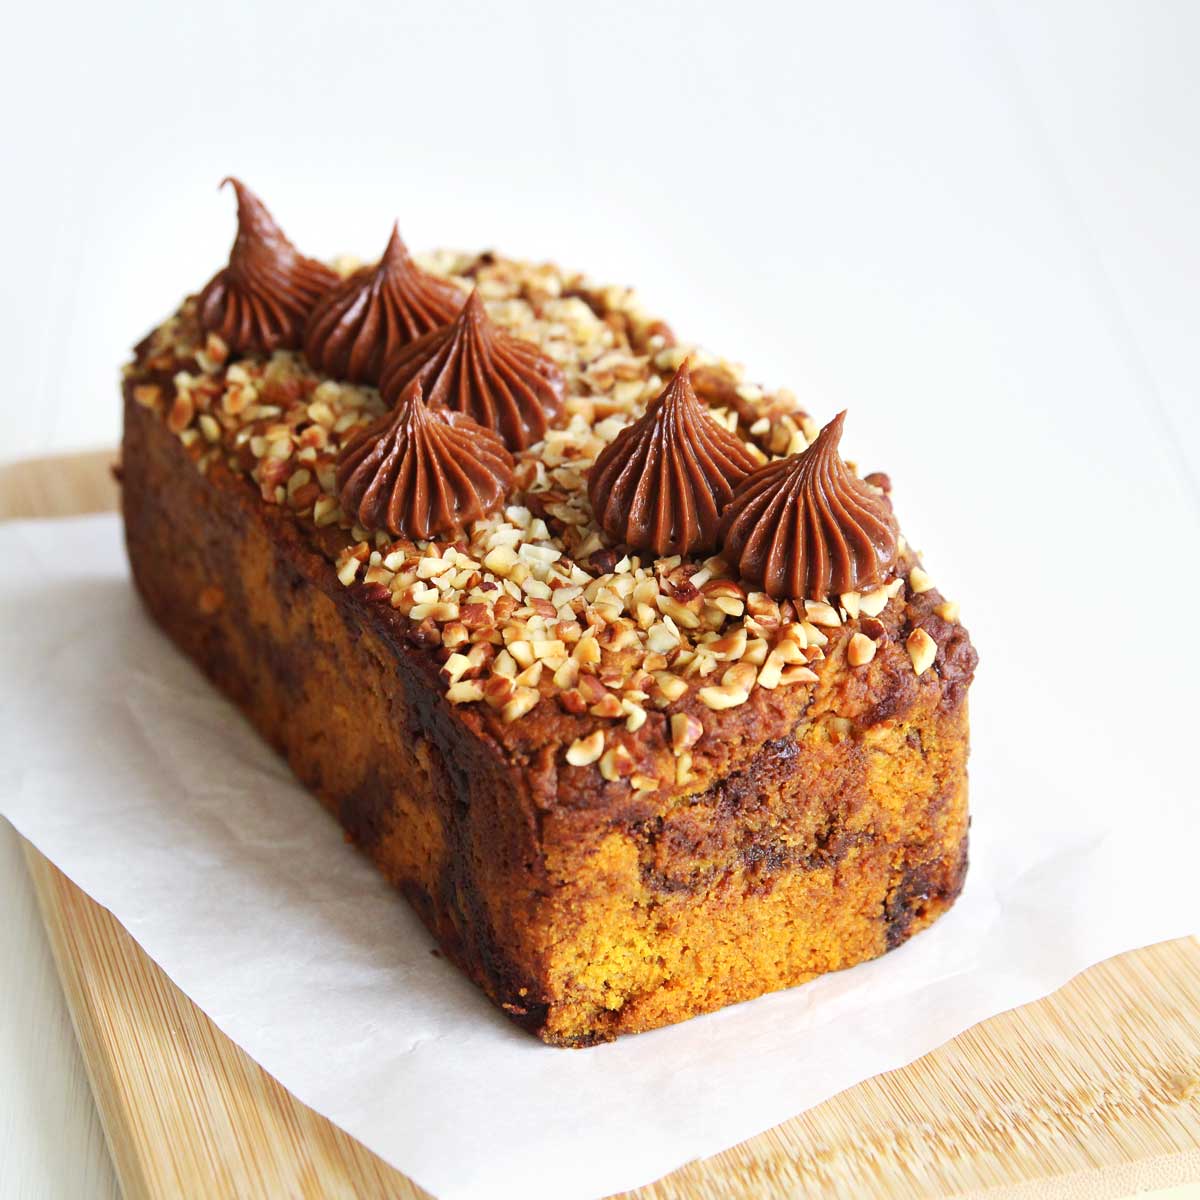 Nutella Marbled Chocolate Pumpkin Bread (No Eggs Required!) - Brown Sugar Whipped Cream